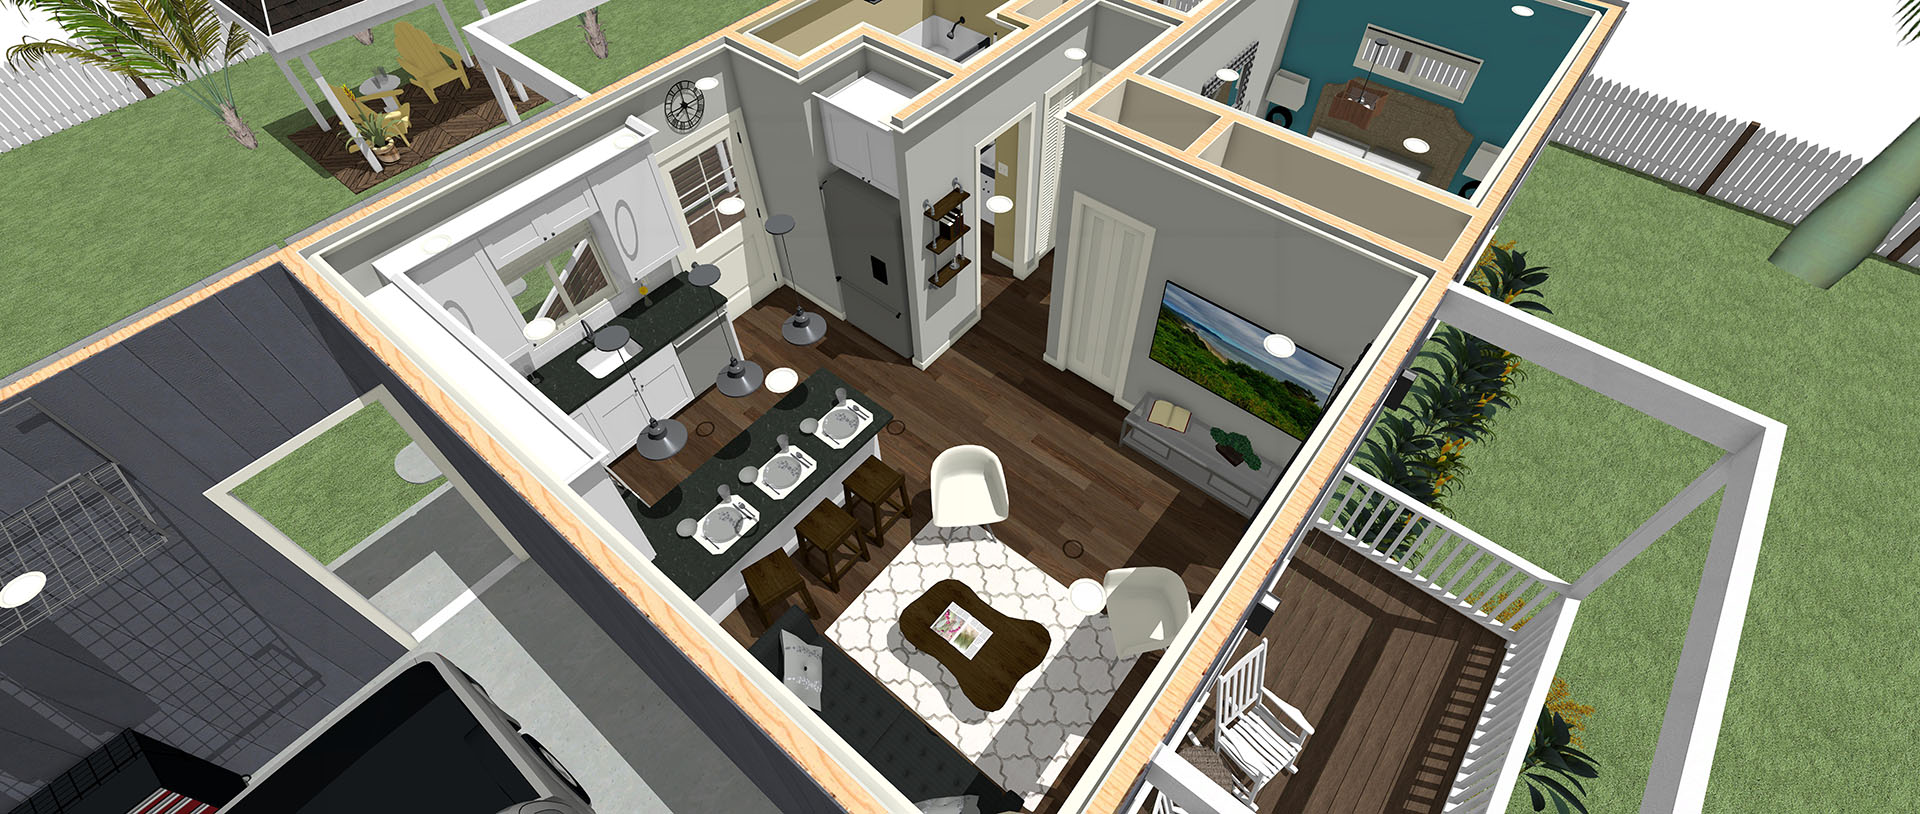 Top aerial view of a house with 4 rooms